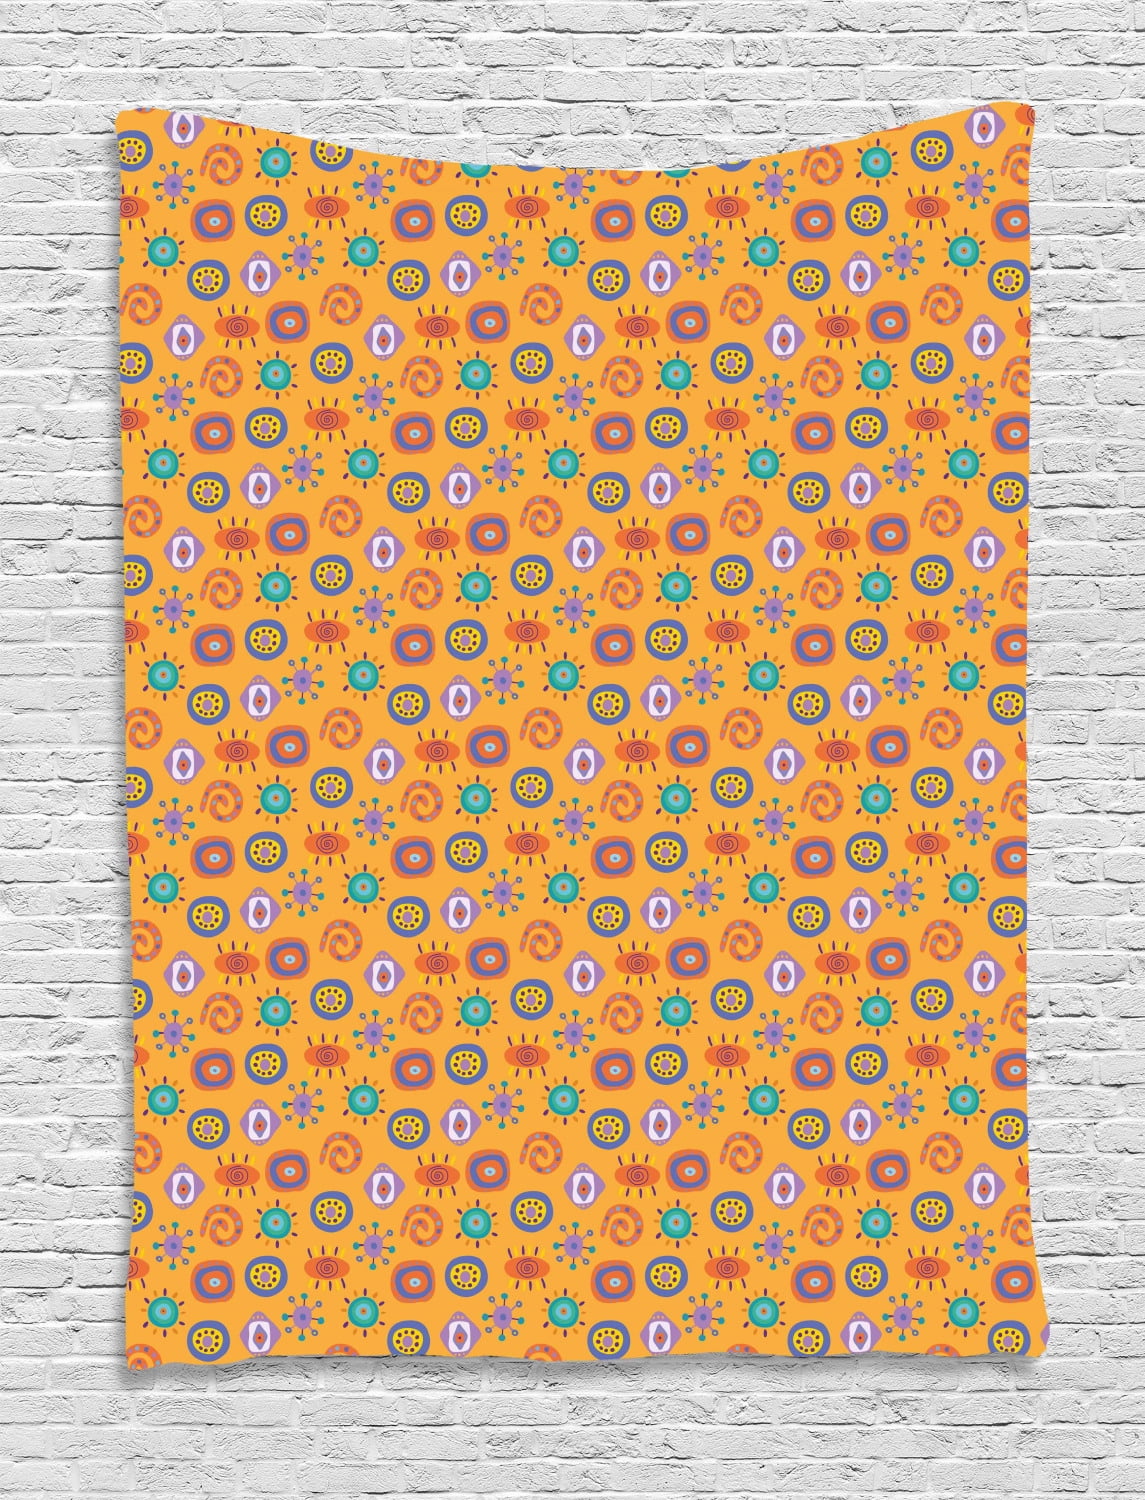  Folk  Art  Tapestry Colorful Abstract Repeating Pattern 